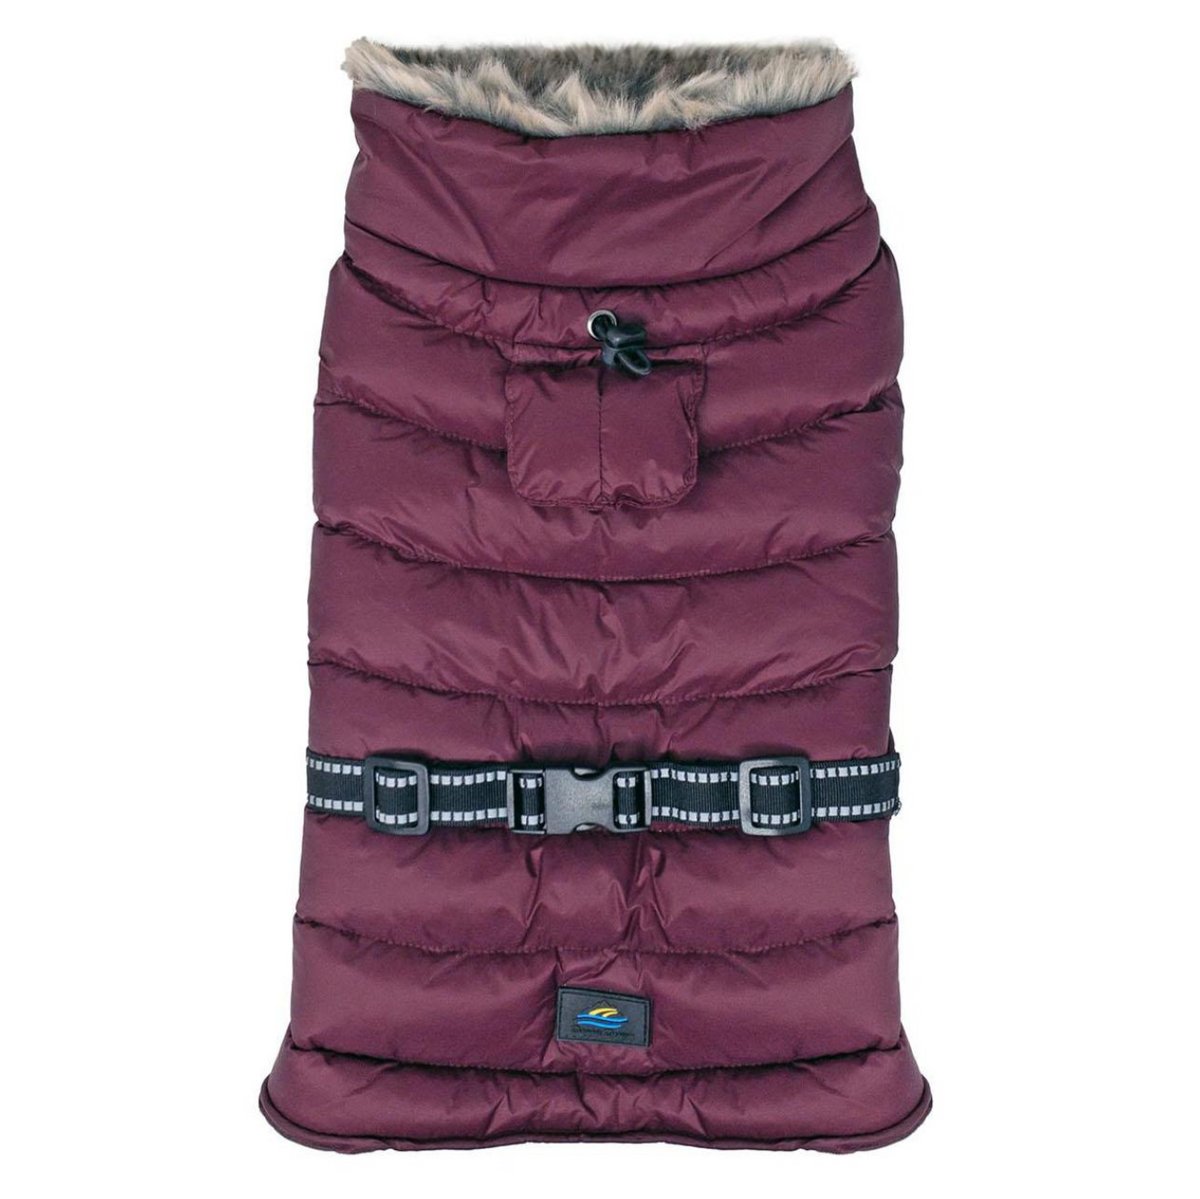 Alpine Extreme Weather Puffer Coat - Burgundy - 3 Red Rovers